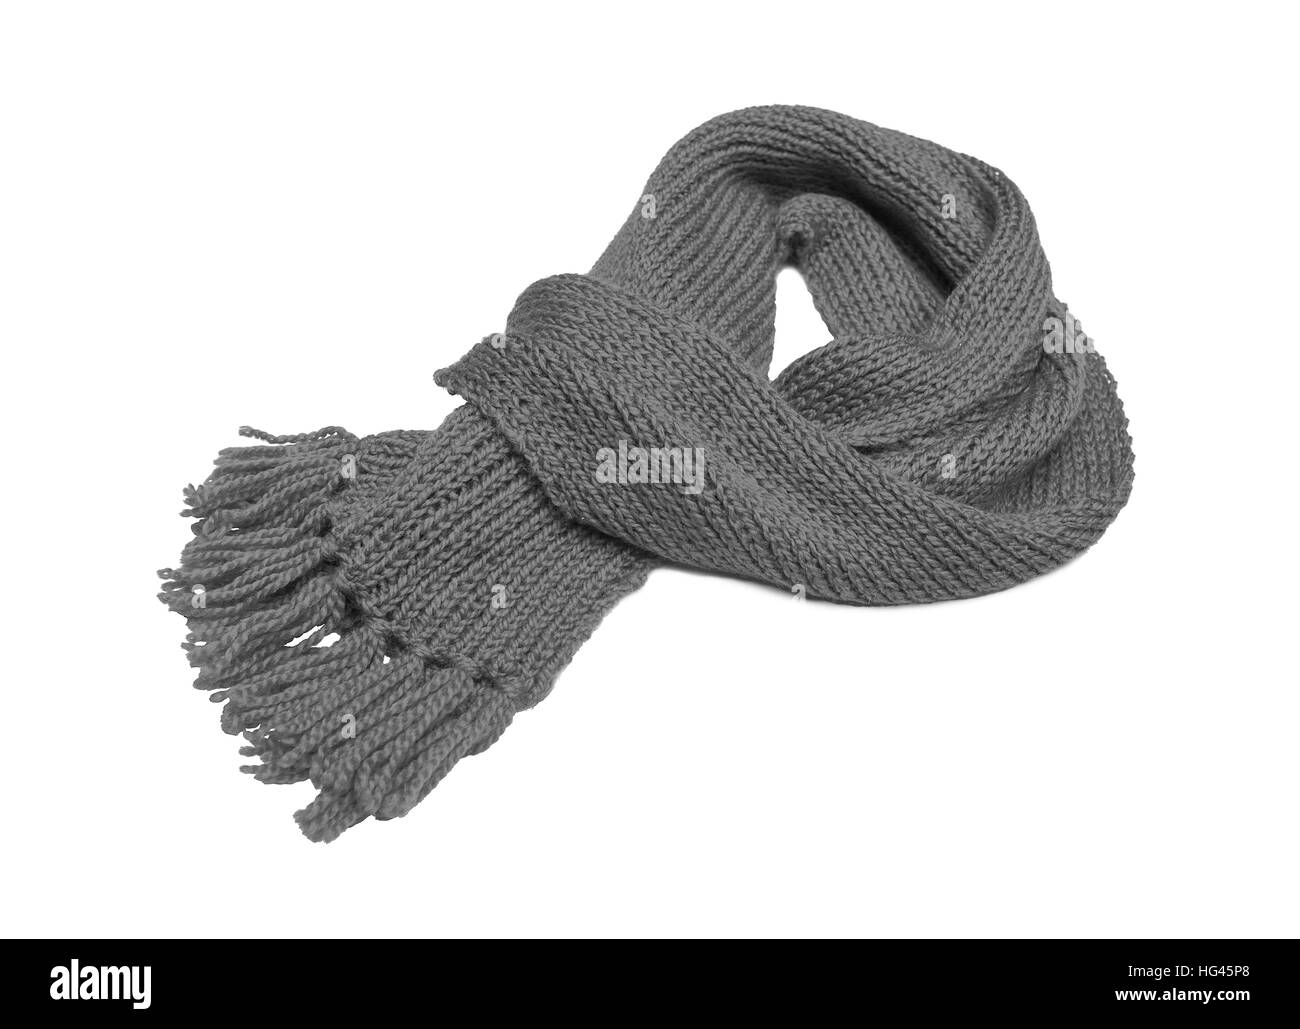 Gray scarf on a white background. Stock Photo